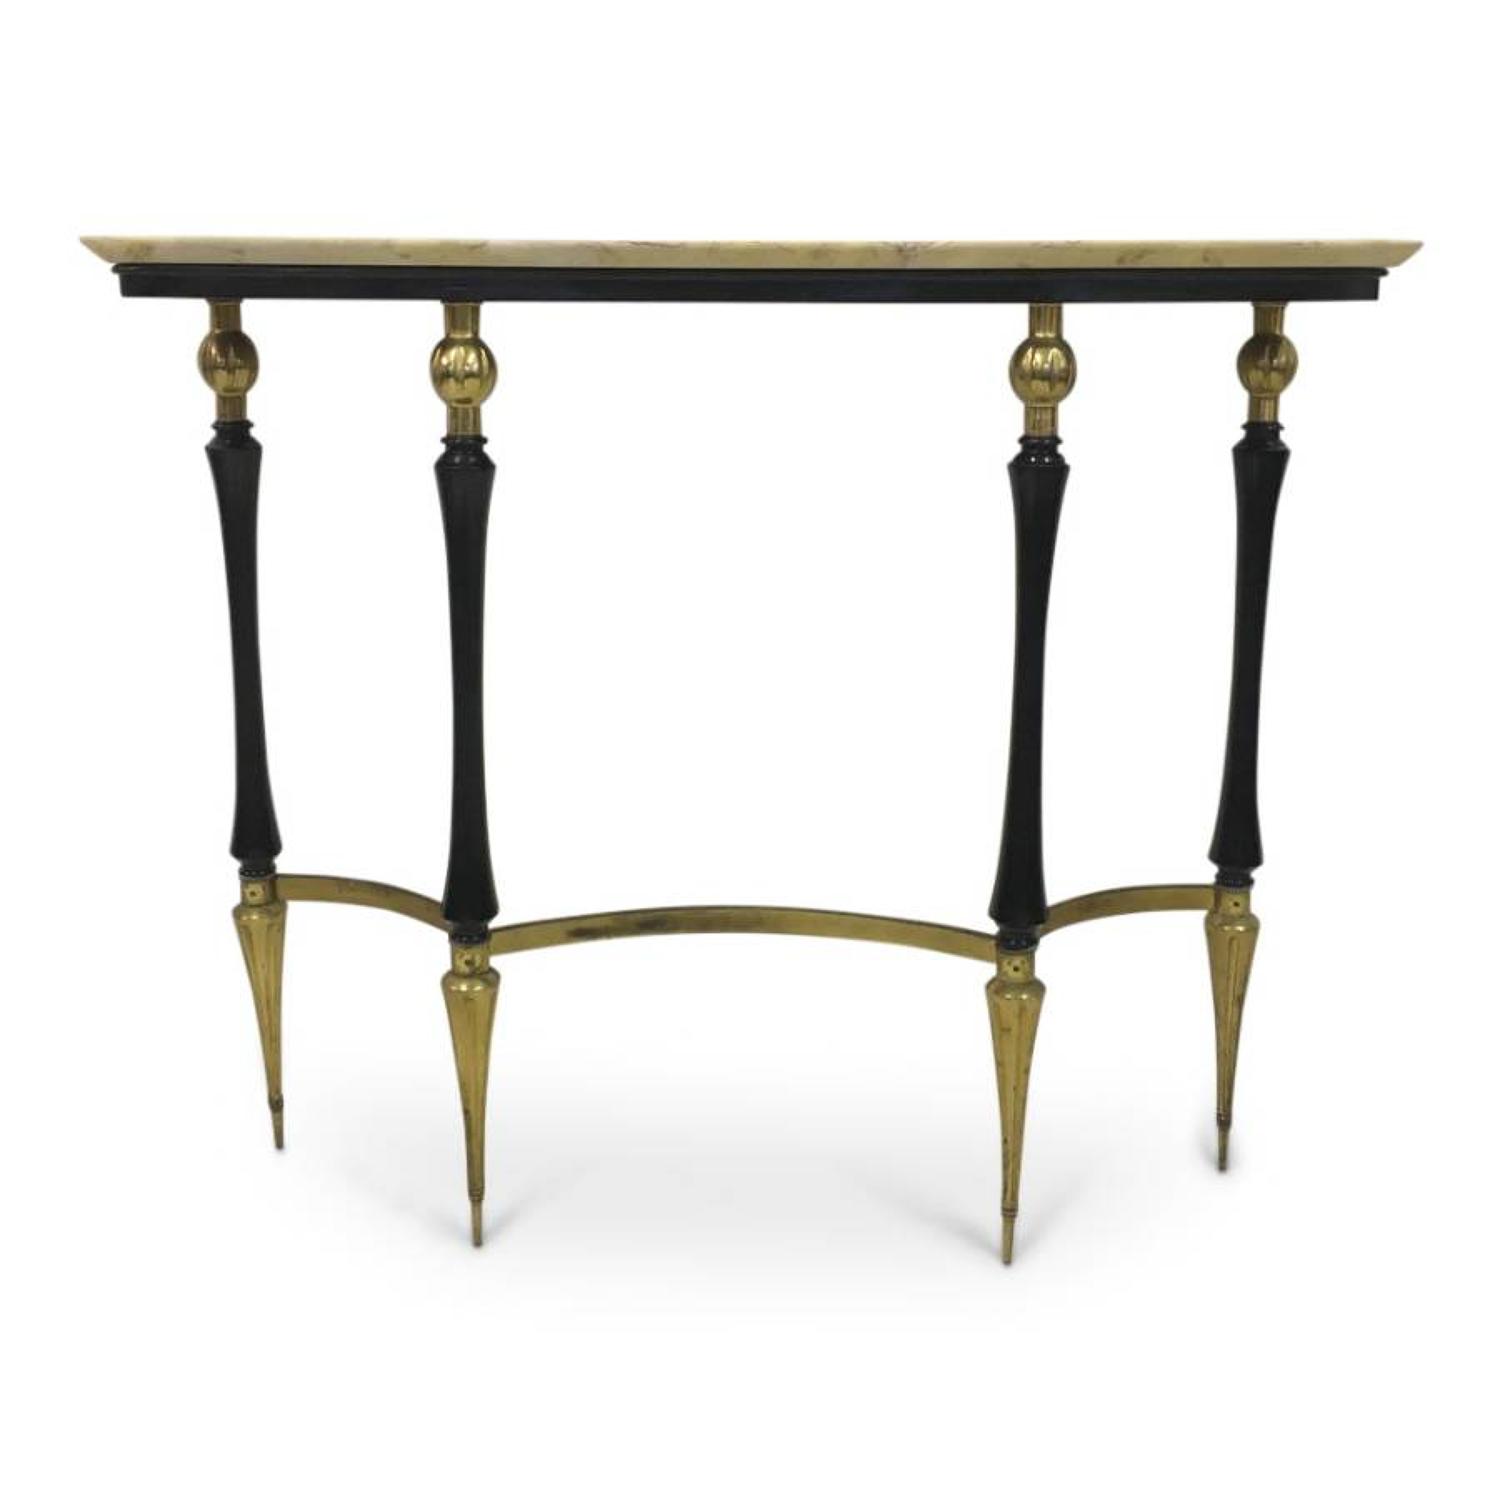 Italian ebonised wood and brass console table